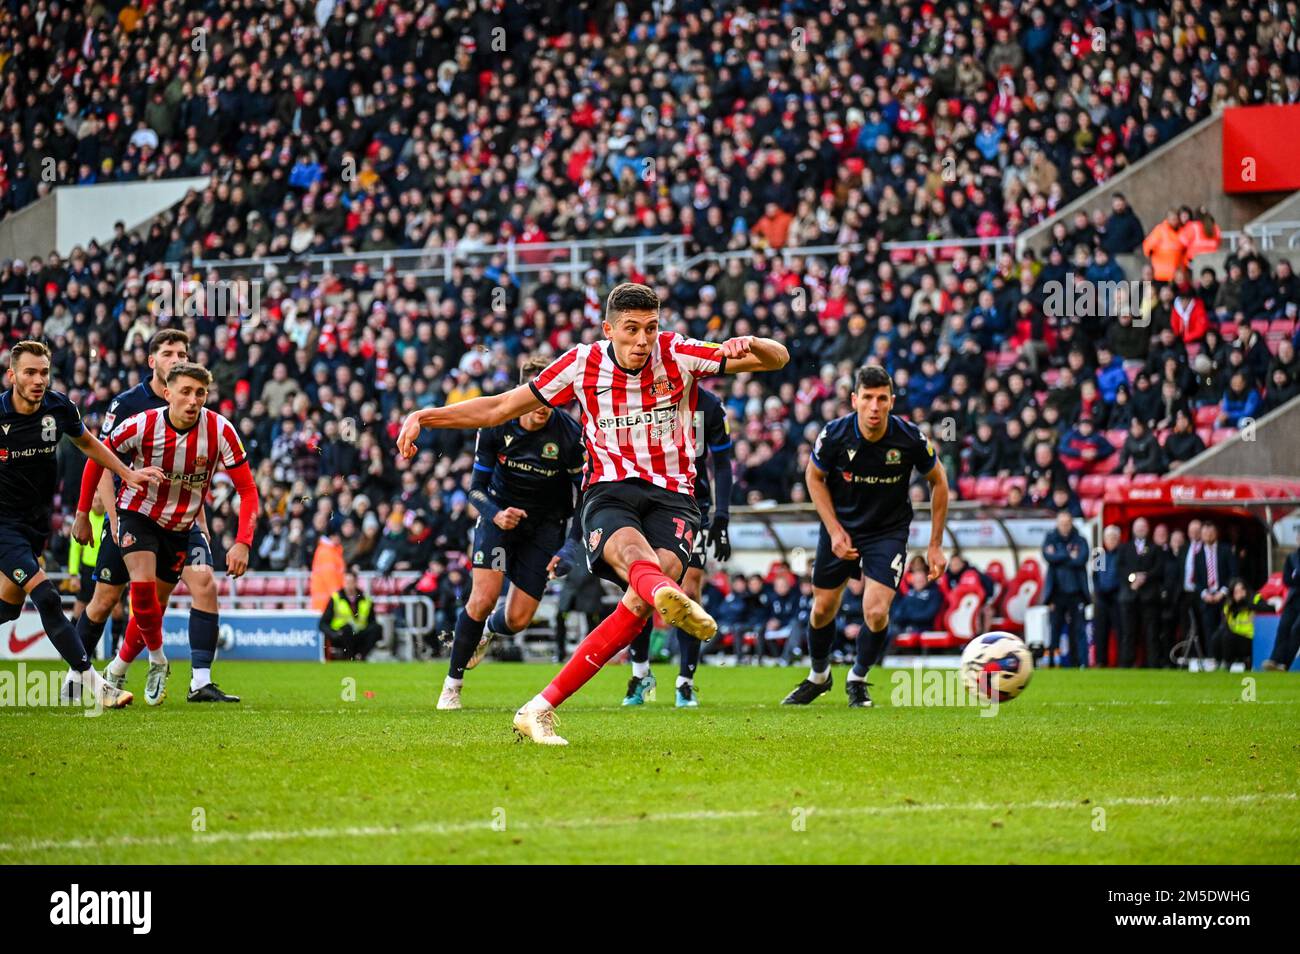 Sunderland AFC forward Ross Stewart equalises from the penalty spot against Blackburn Rovers in the EFL Championship. Stock Photo